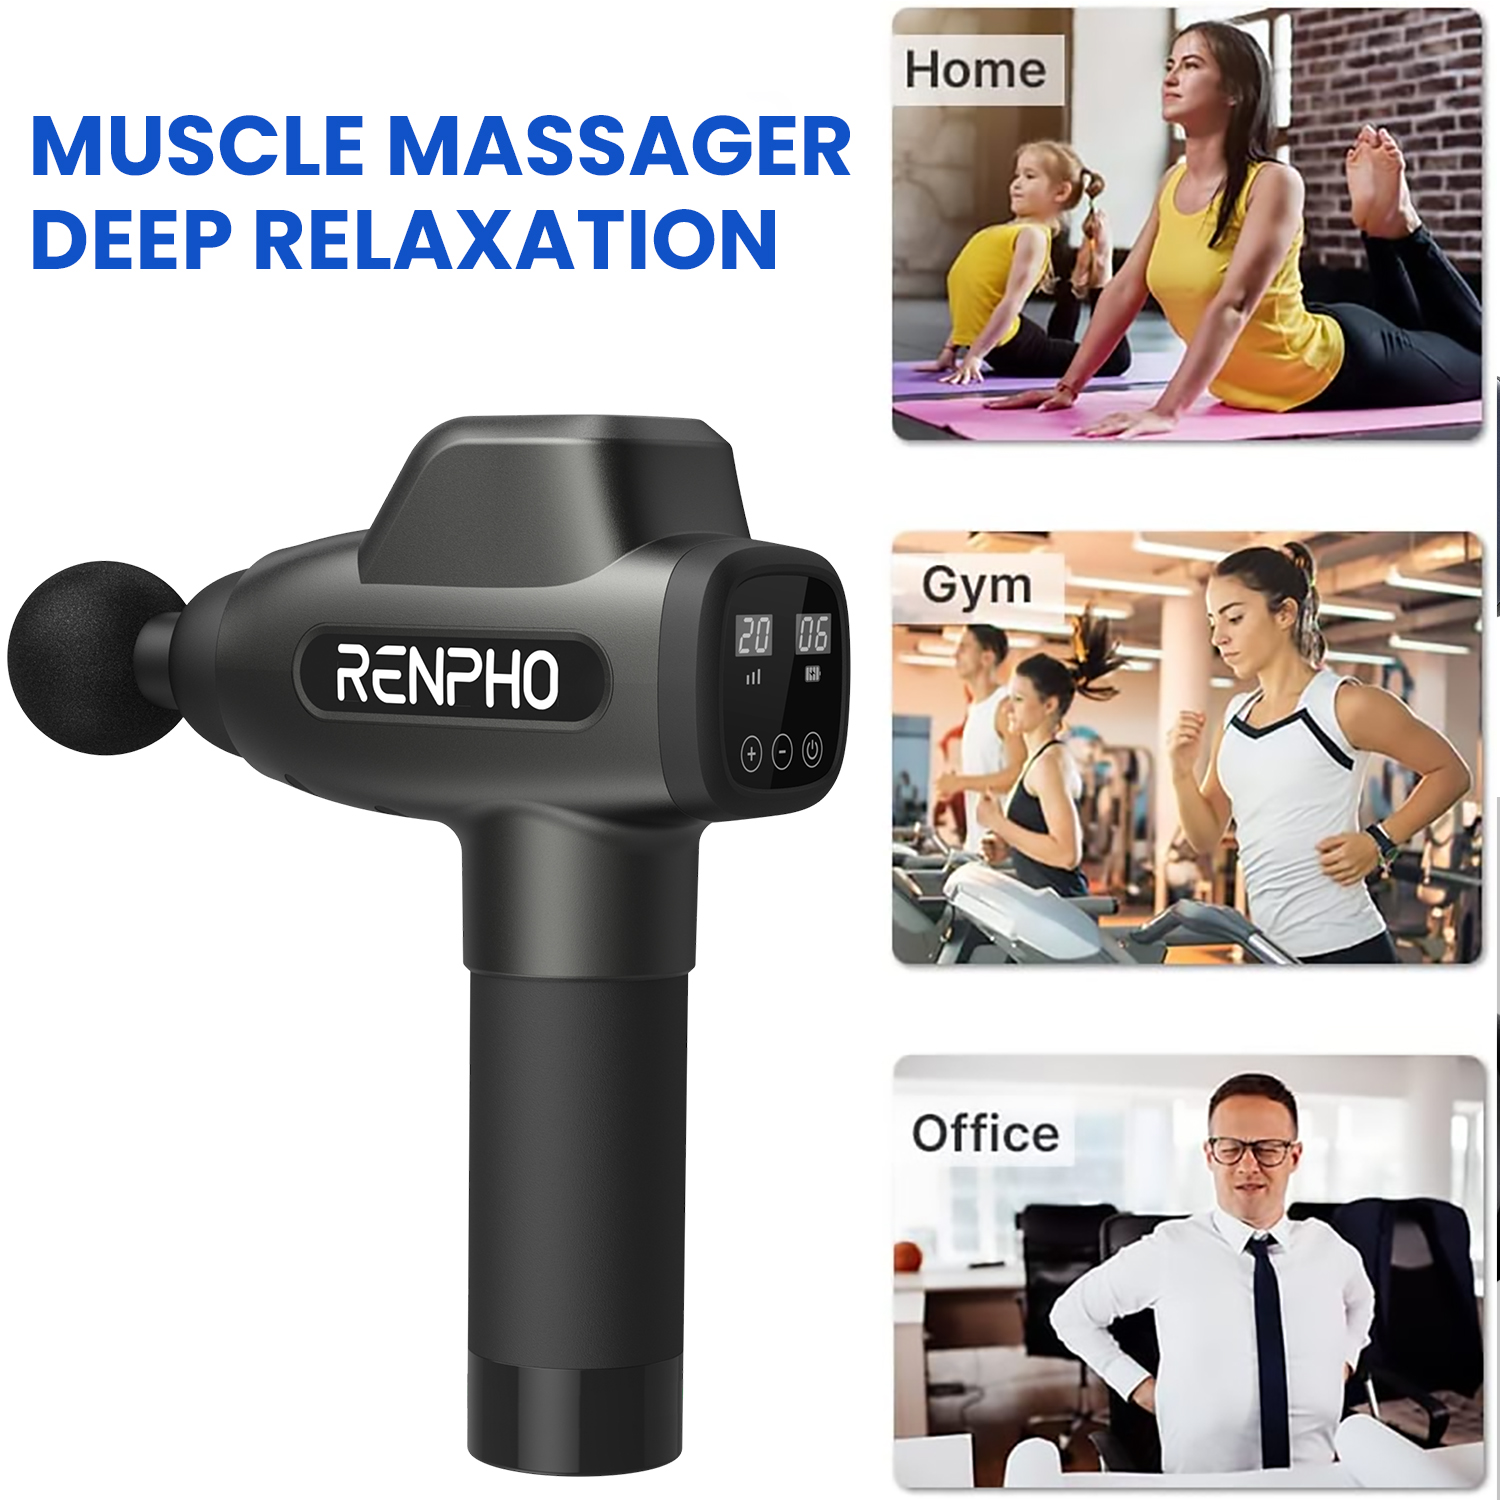 Renpho Percussion Muscle Massage Guns for Athletes Pain Relief -Black, Ideal Gifts - image 5 of 12